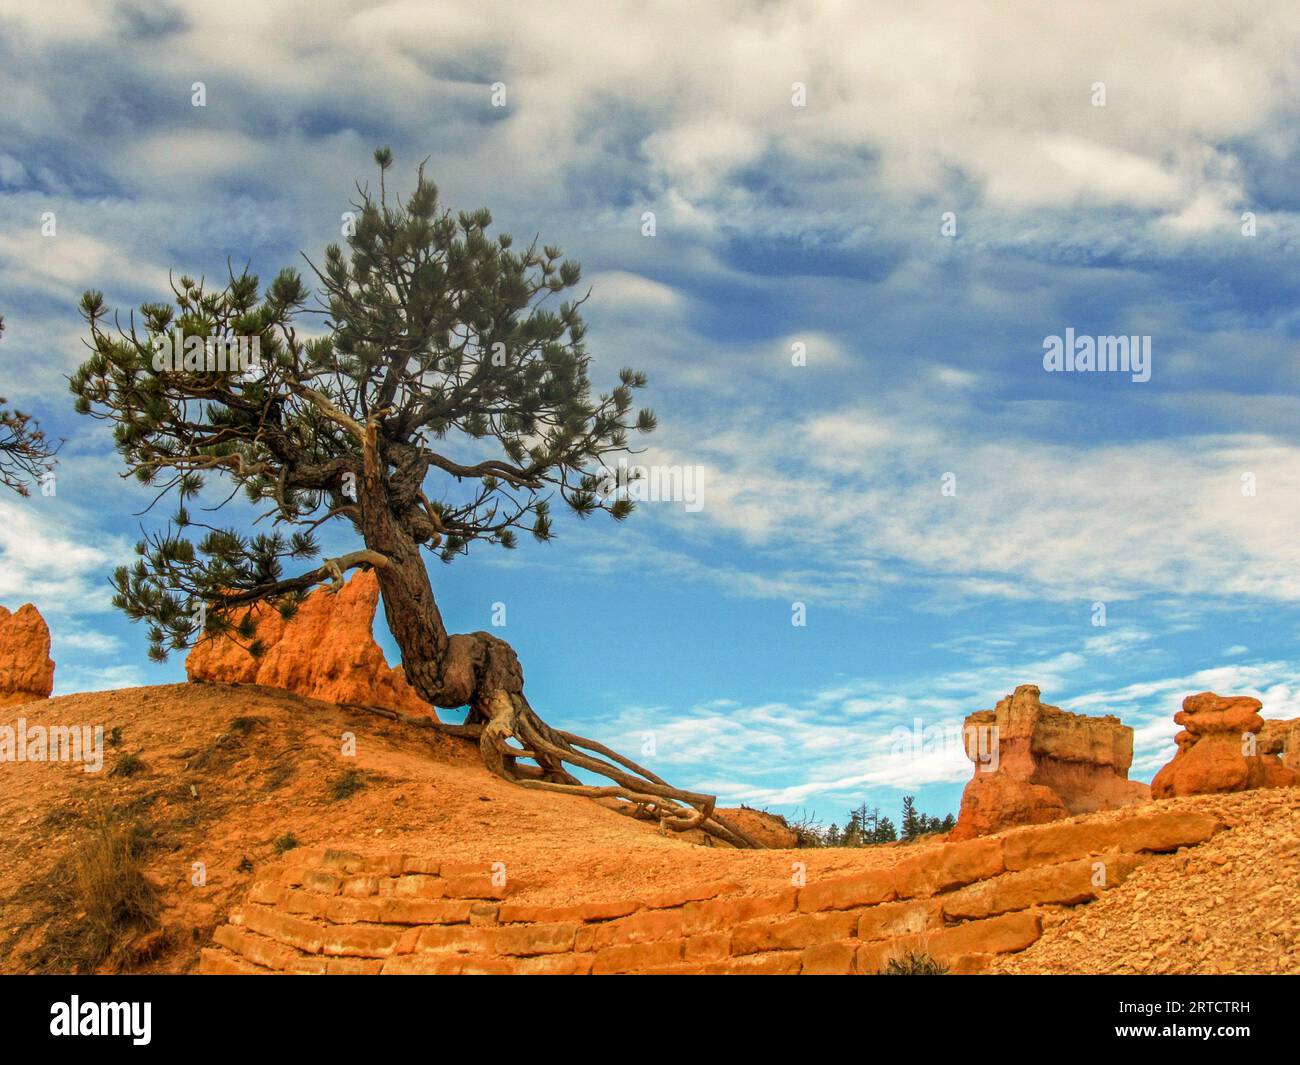 A young Limber Pine, Pinus Flexilis, growing along the built-up side of the Queens Garden Hiking route in Bryce Canyon National Park. Stock Photo